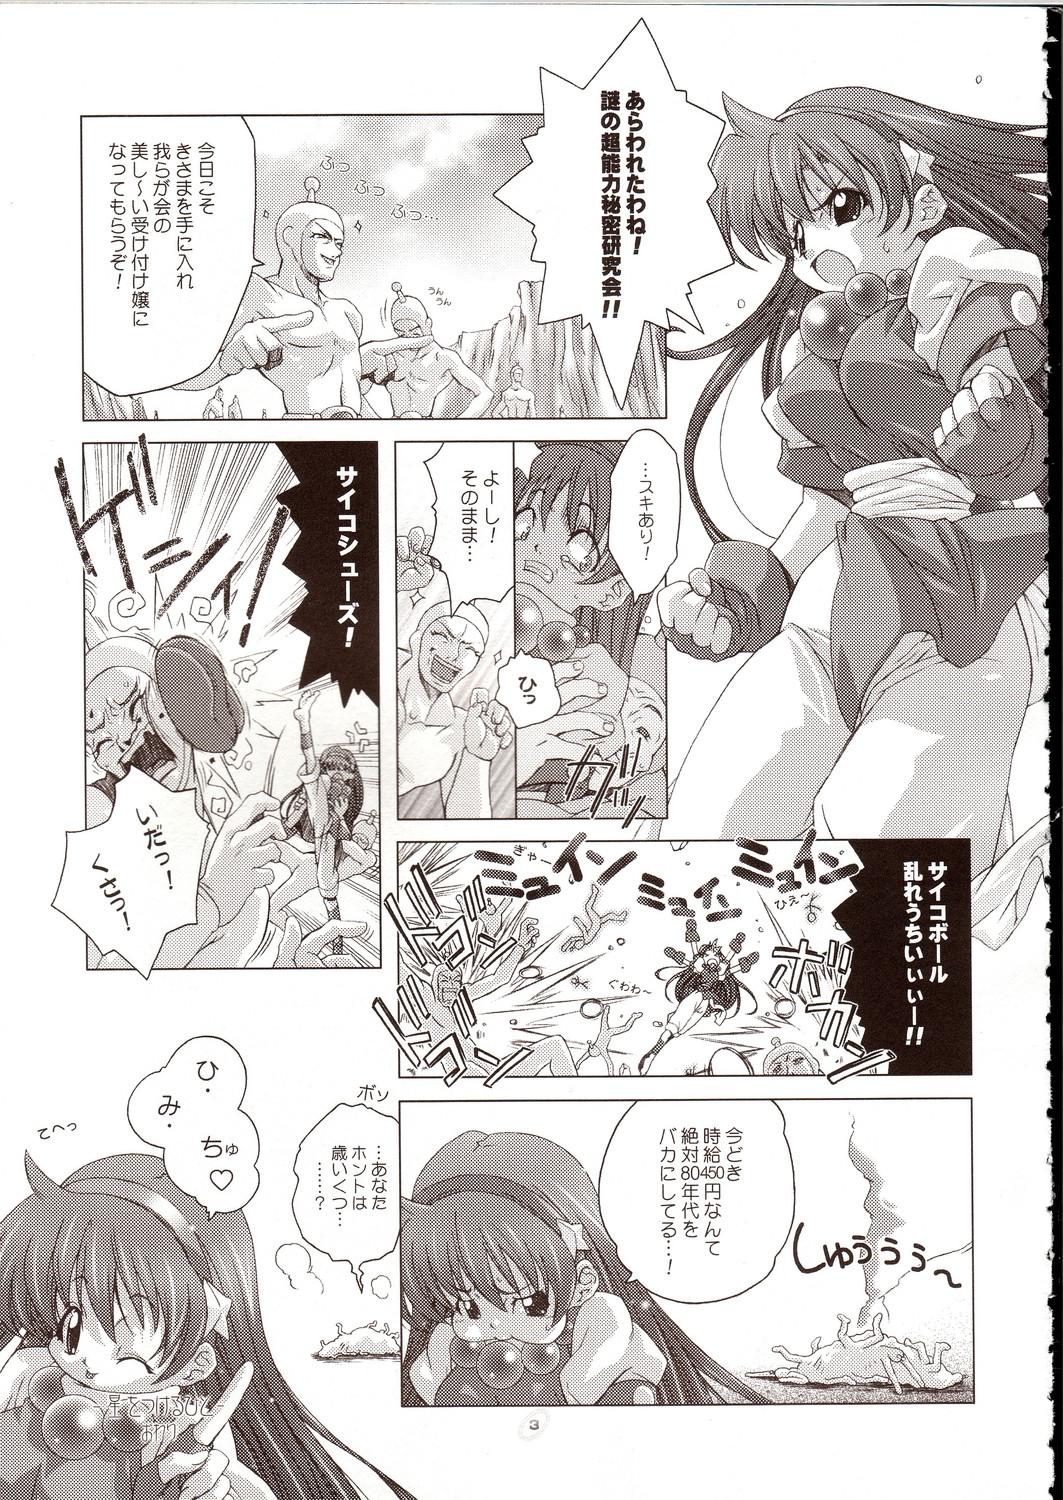 Pigtails Psyze - King of fighters Cams - Page 2